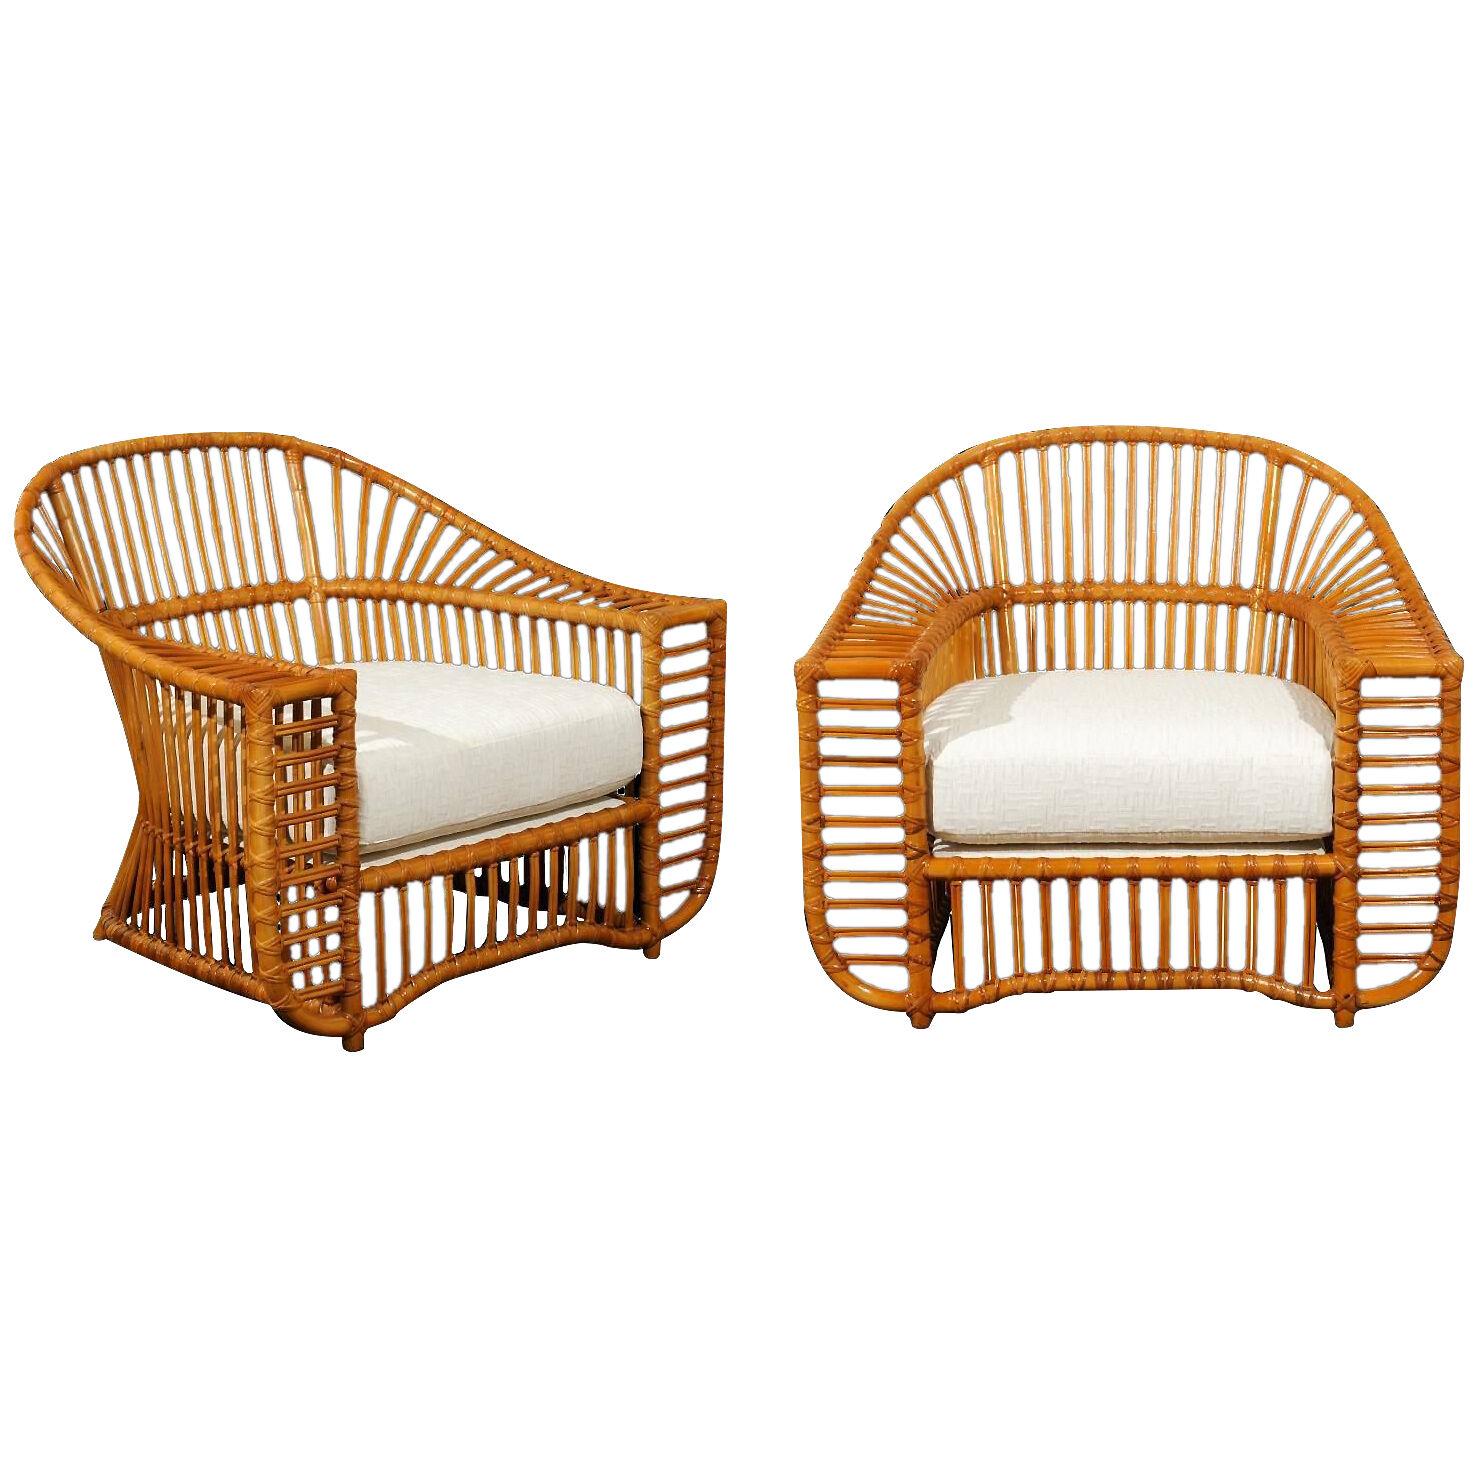 Unique Restored Tiara Lounge or Club Chairs by Henry Olko, Circa 1979 - a Pair